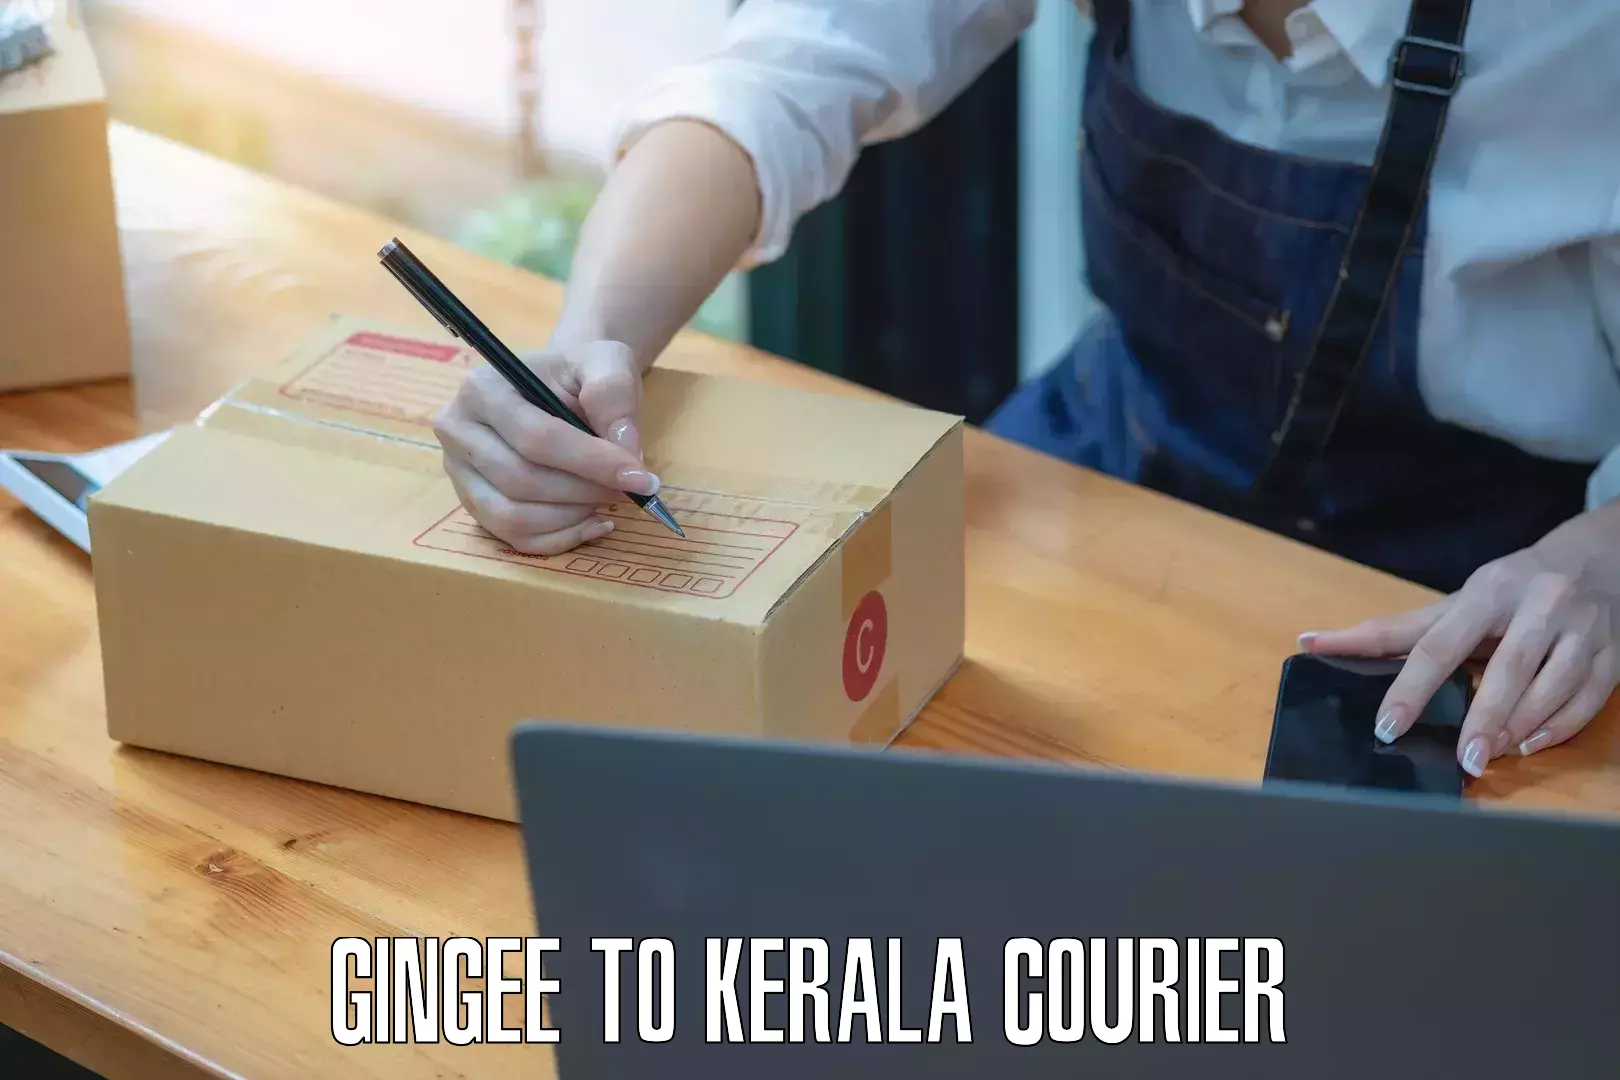 Express courier capabilities Gingee to Cochin Port Kochi